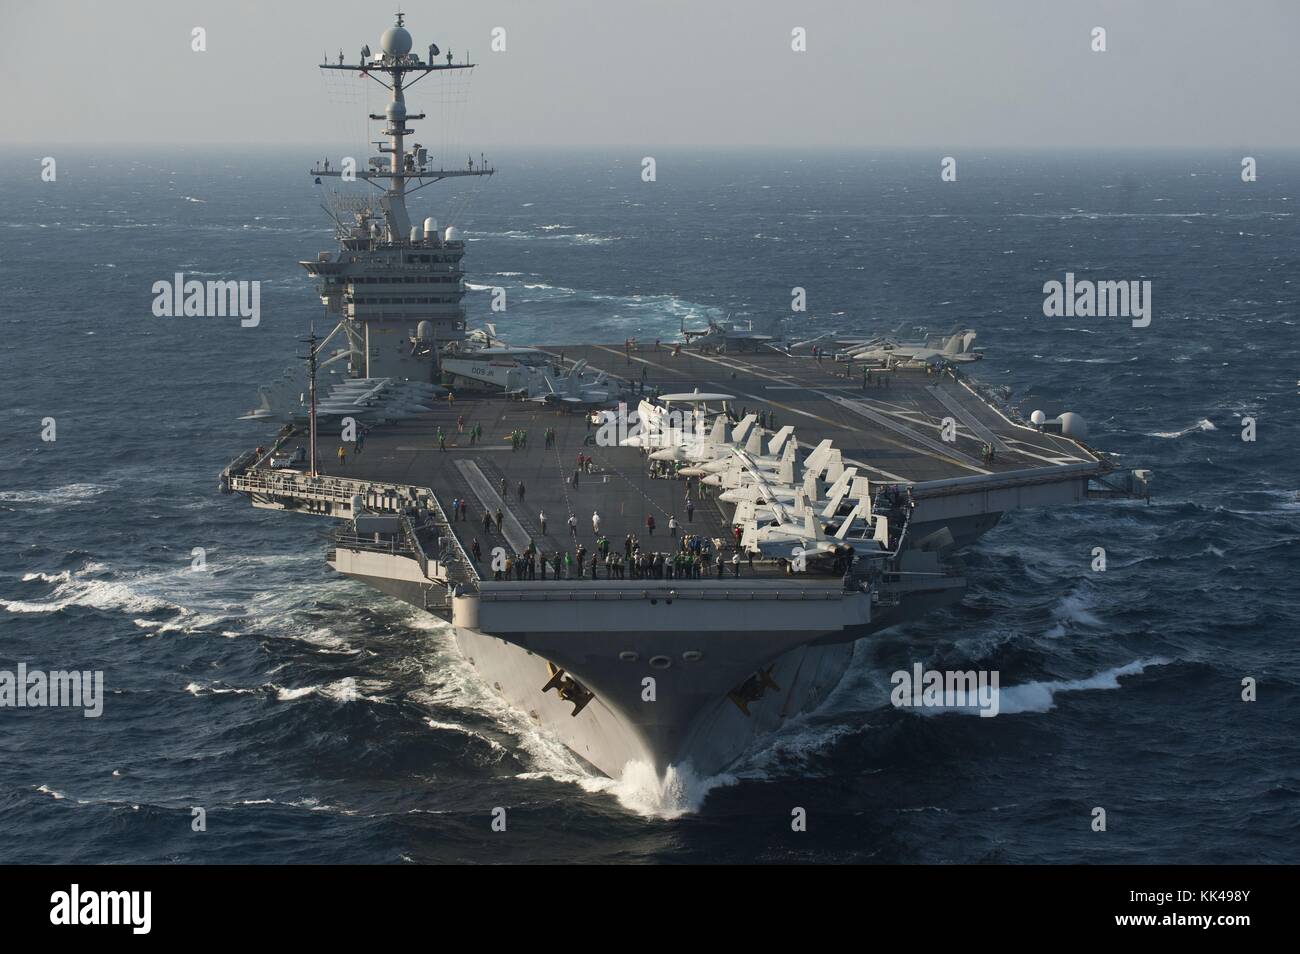 The aircraft carrier USS George Washington CVN 73 is in the East China Sea during a trilateral exercise with the Japan Maritime Self Defence Force and Republic of Korea Navy, East China Sea, 2012. Image courtesy Mass Communication Specialist Paul Kelly/US Navy. Stock Photo